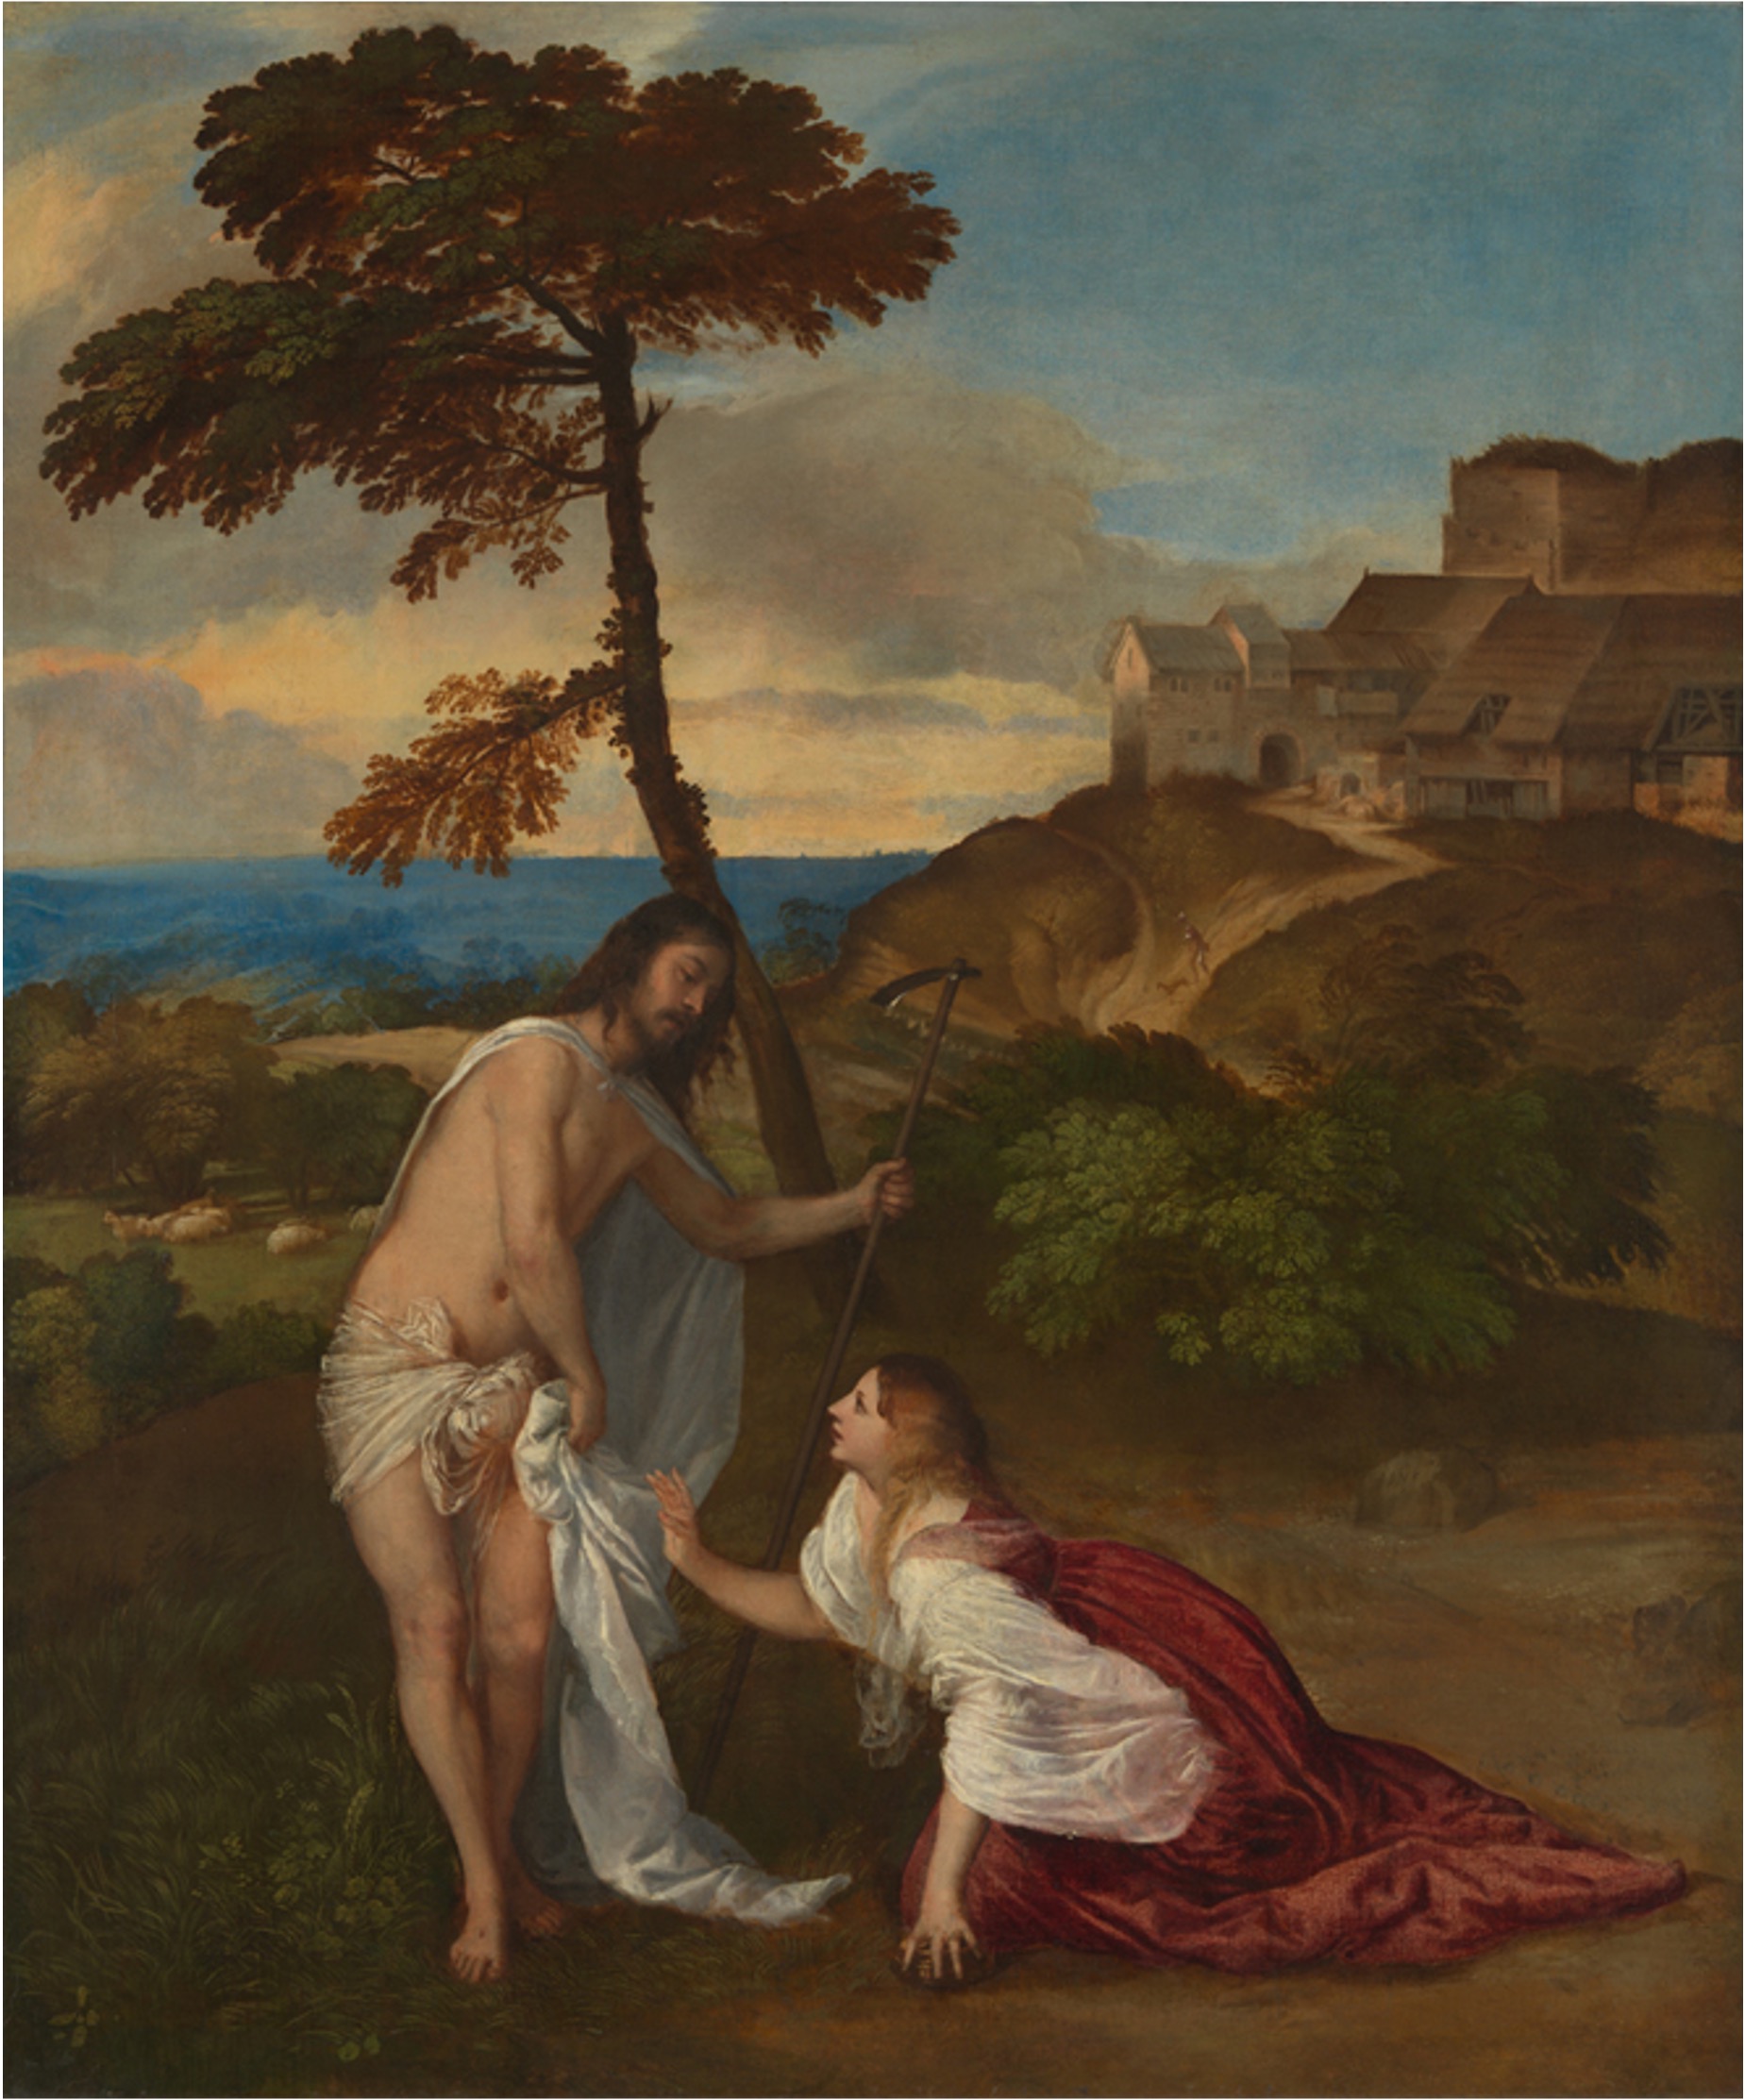 Painting showing Mary Magdalene reaching for the robes of Jesus.